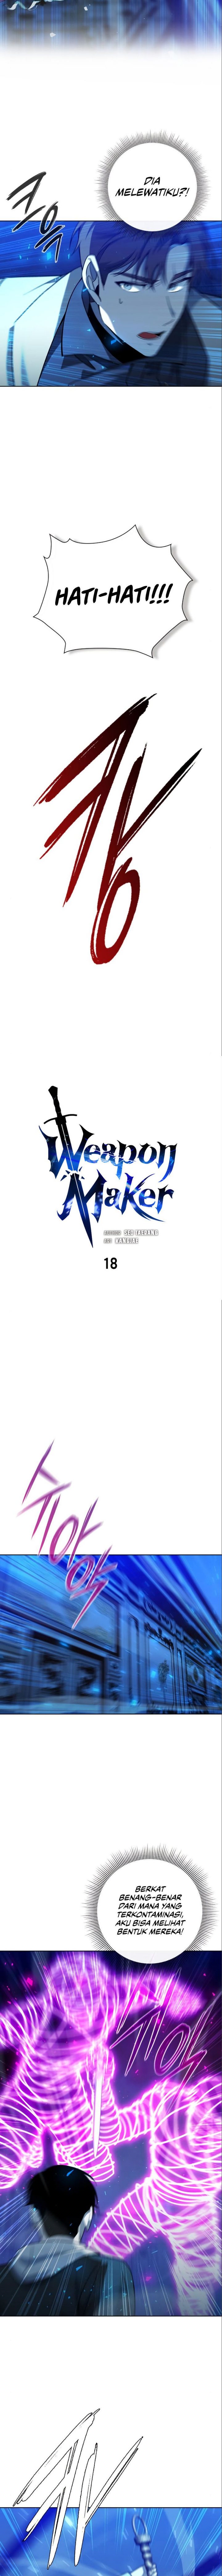 Weapon Maker Chapter 18